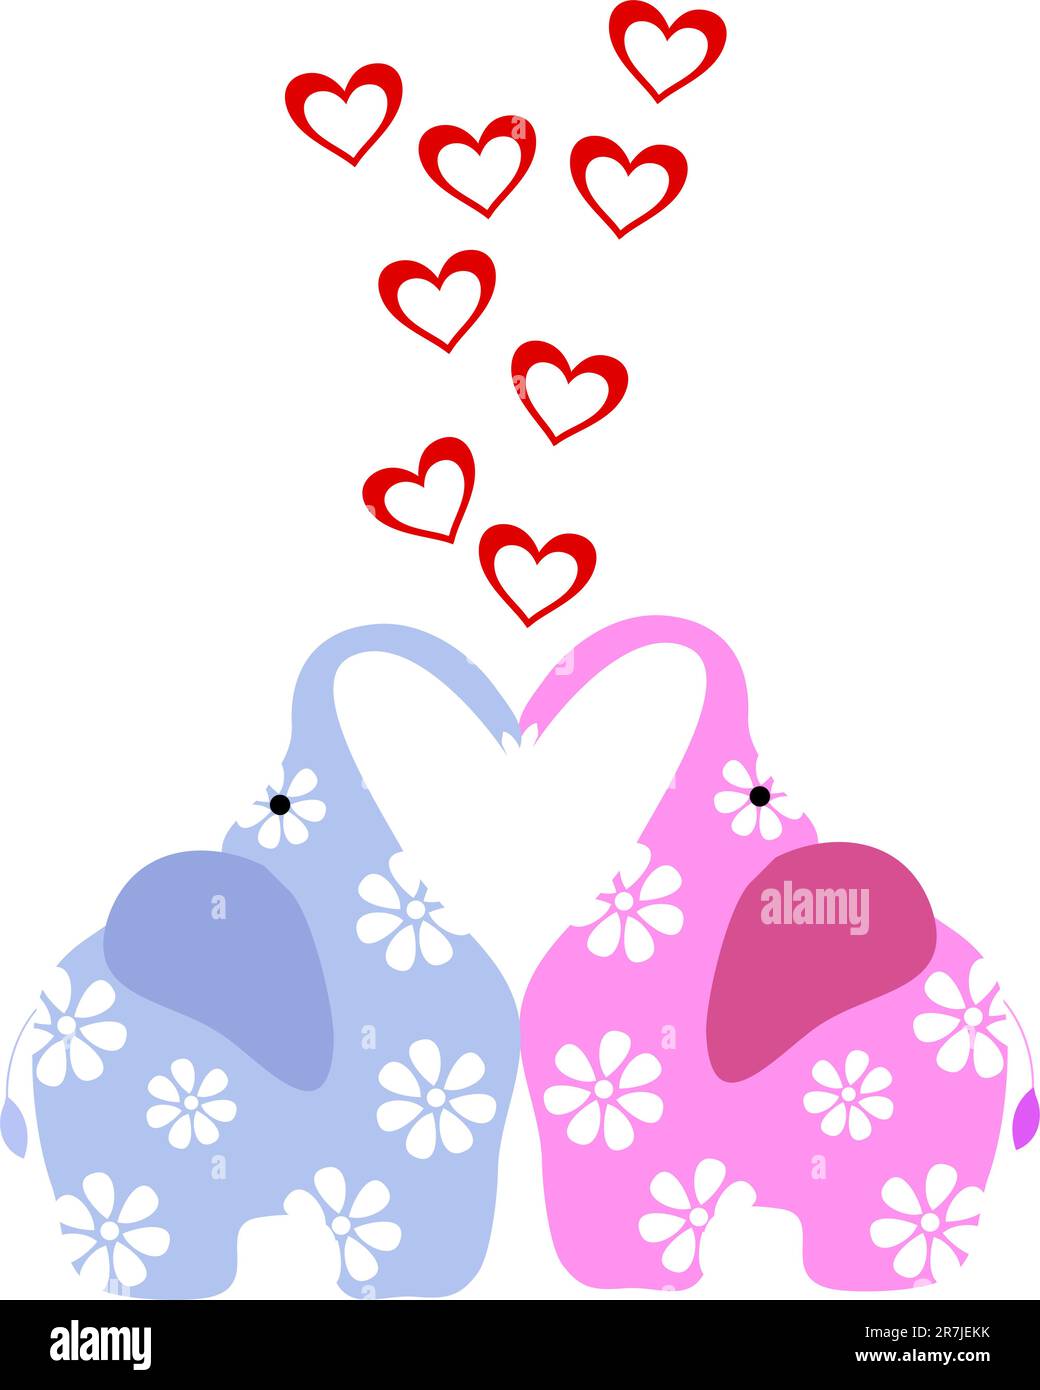 two cute love elephant with red hearts Stock Vector